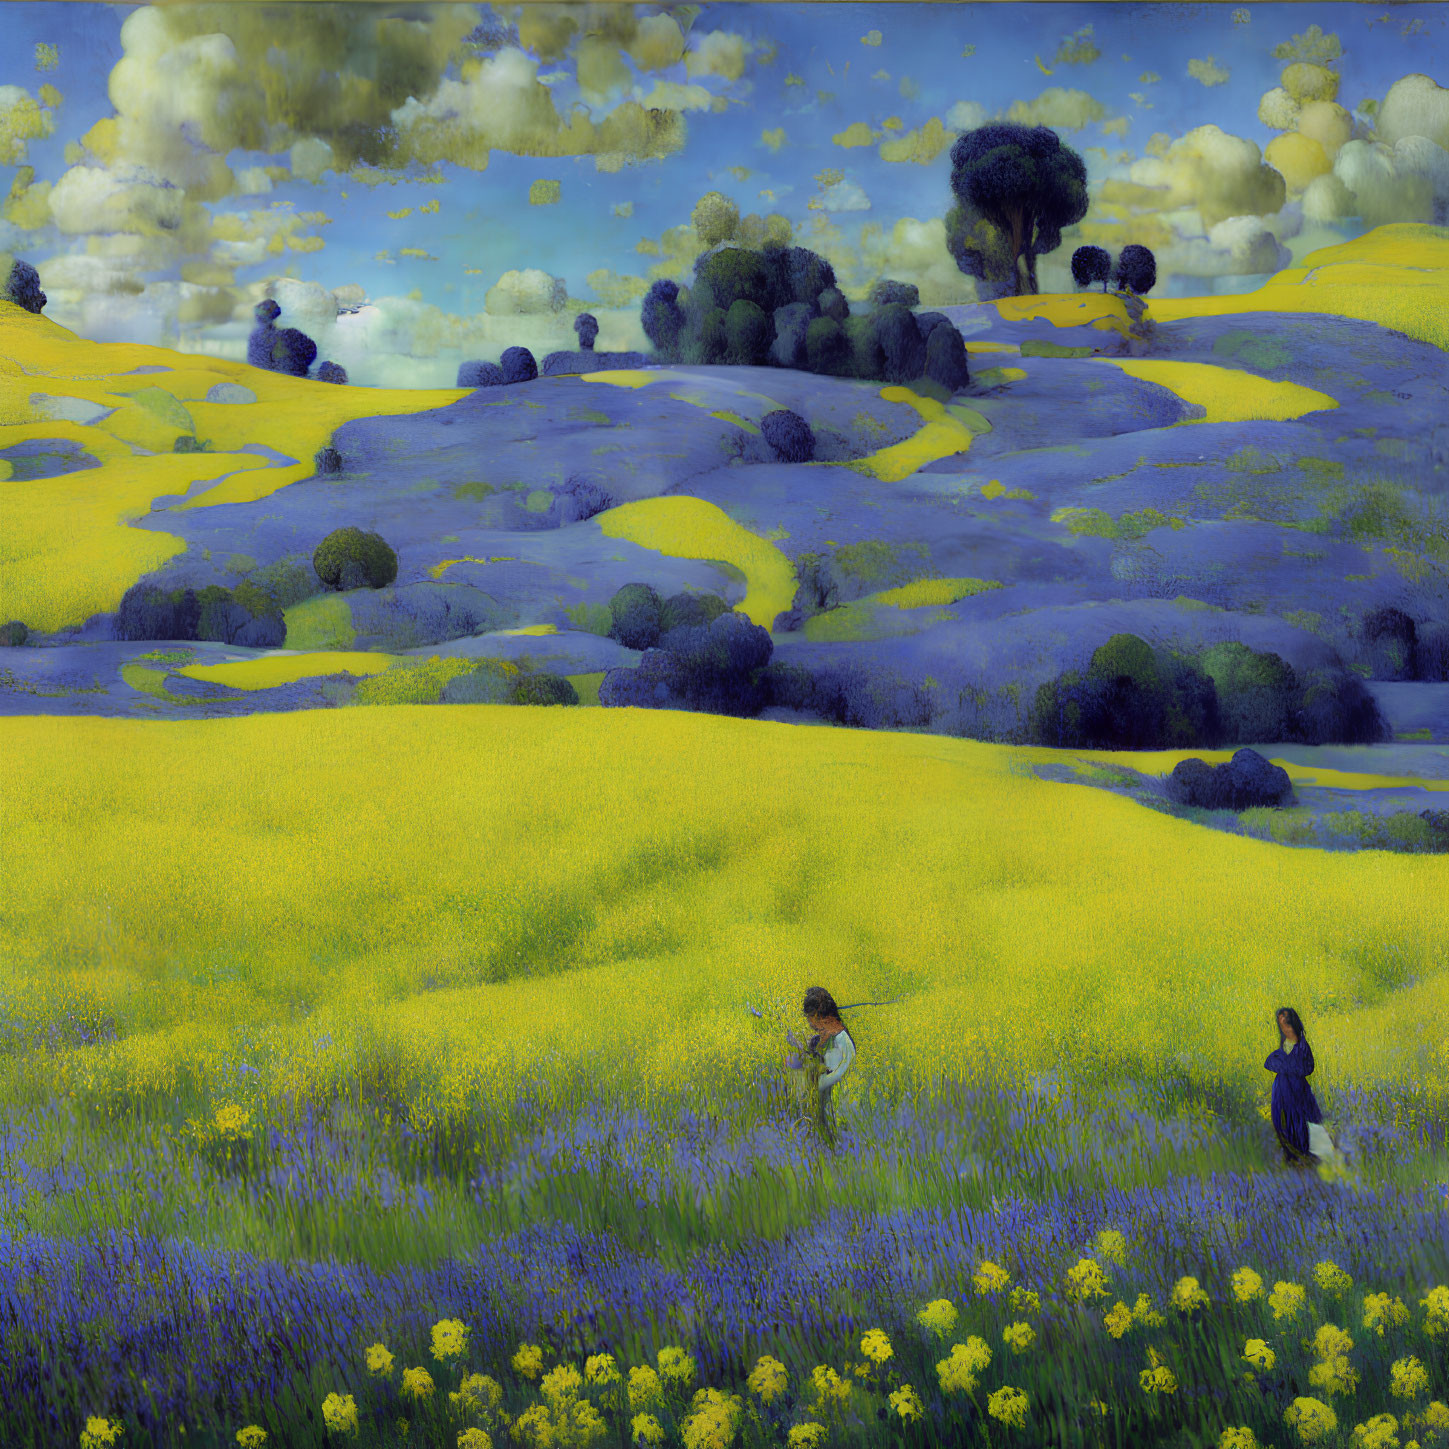 Colorful painting of yellow flower field under blue sky with figures